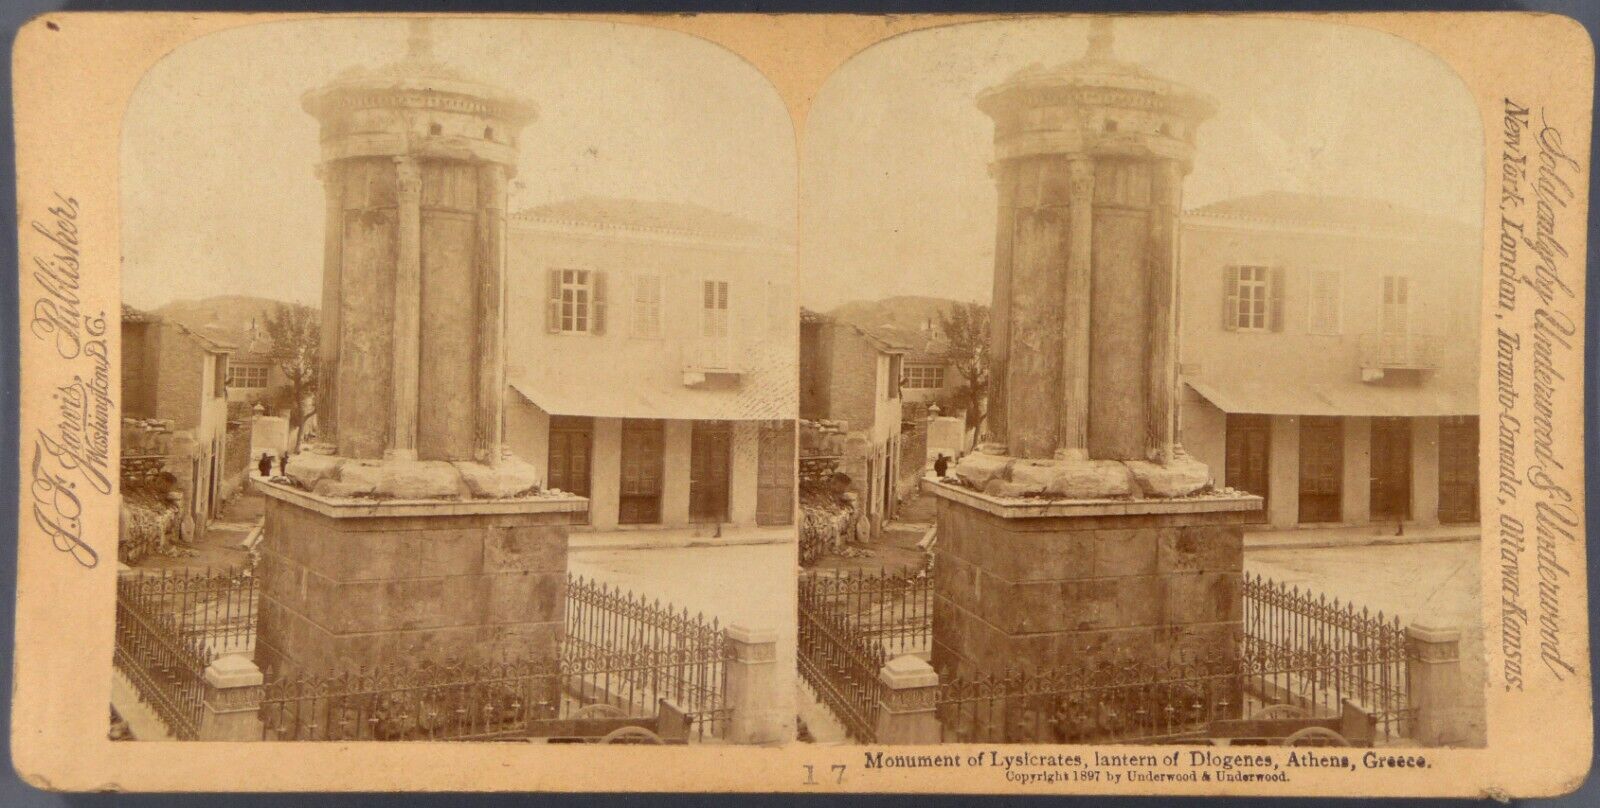 Greece.Greece.Athens.Athens.Lysicrates.Lantern Diog.Photo Stereo.Stereoview.1897